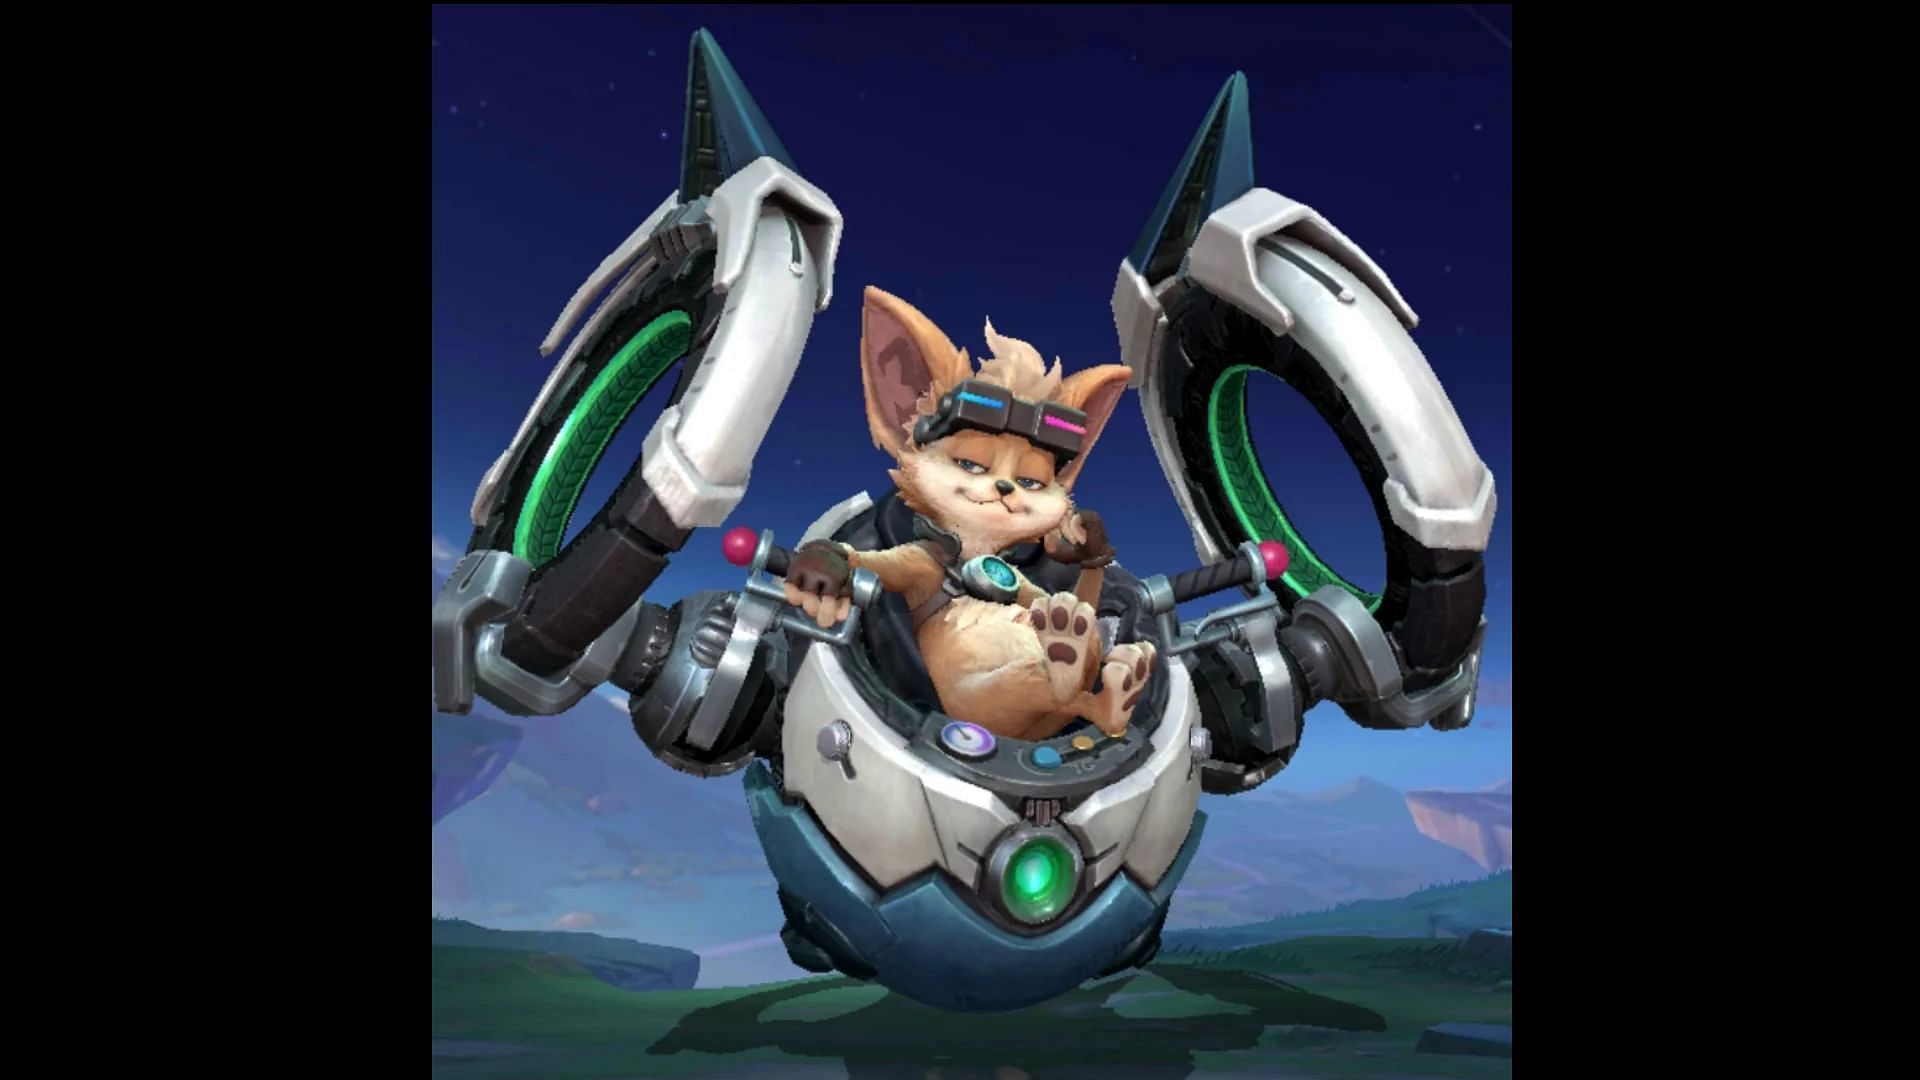 Chip will soon enter the roster riding his hovercraft (Image via Moonton Games)